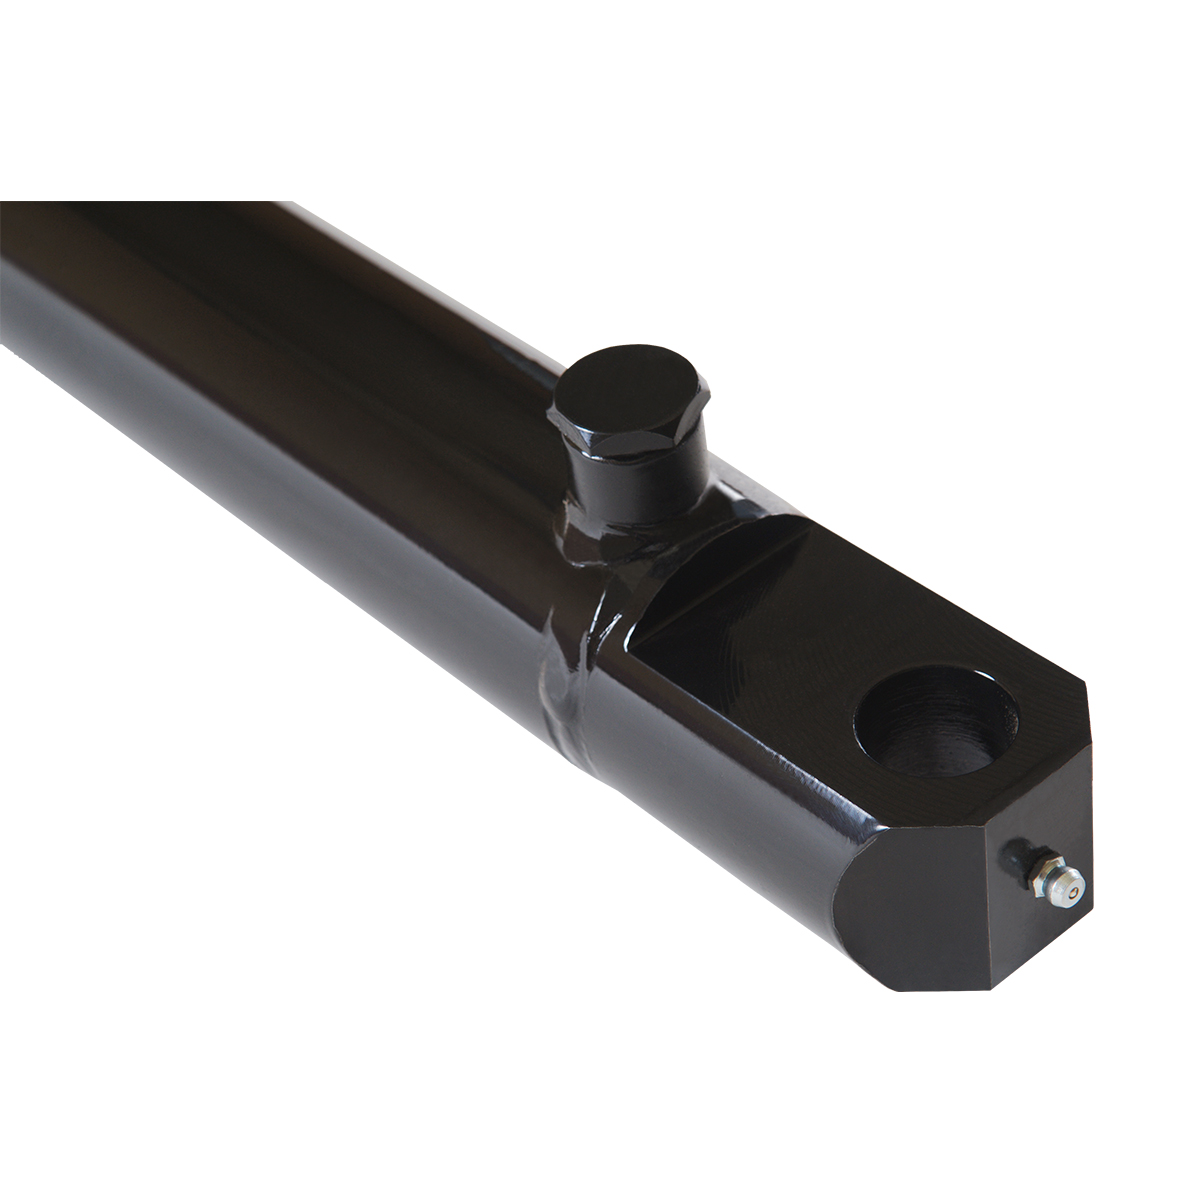 2 bore x 12 stroke hydraulic cylinder, welded tang double acting cylinder | Magister Hydraulics